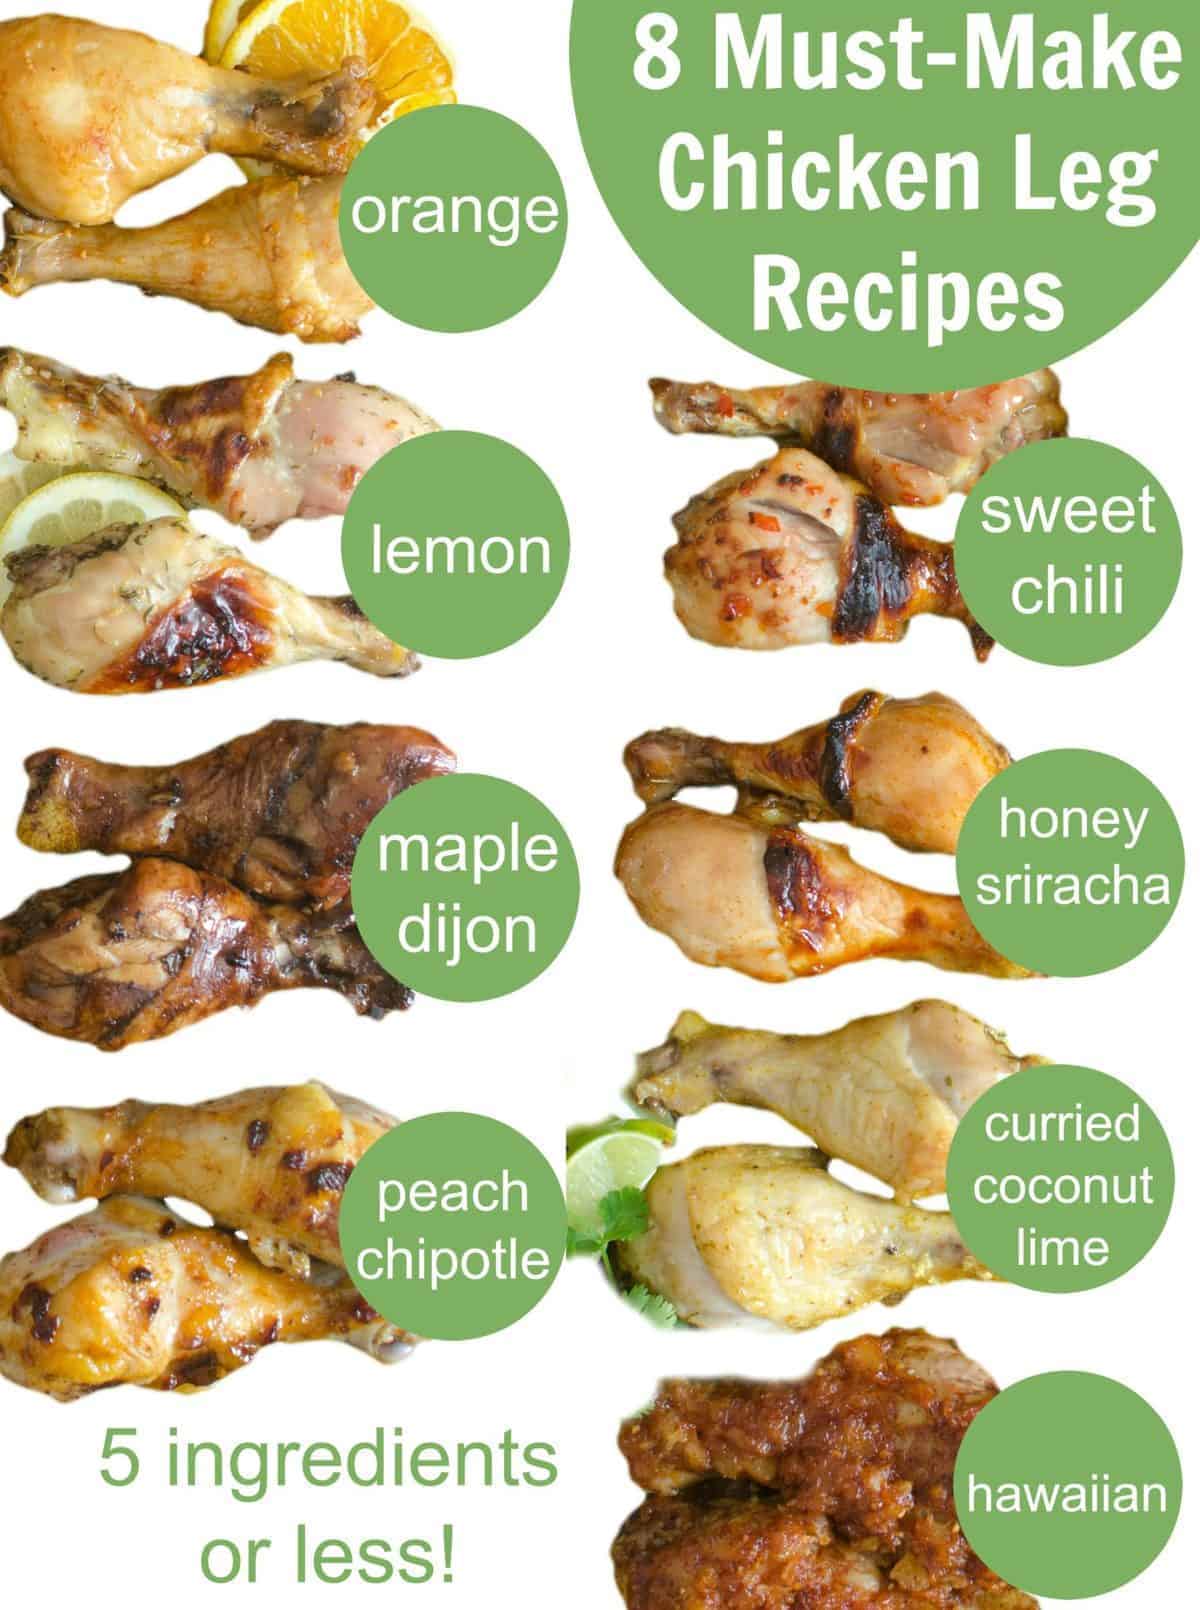 How to Make Chicken Legs + 8 of the Best Chicken Leg Recipes (All the Sauces Have 5 Ingredients or Less!)